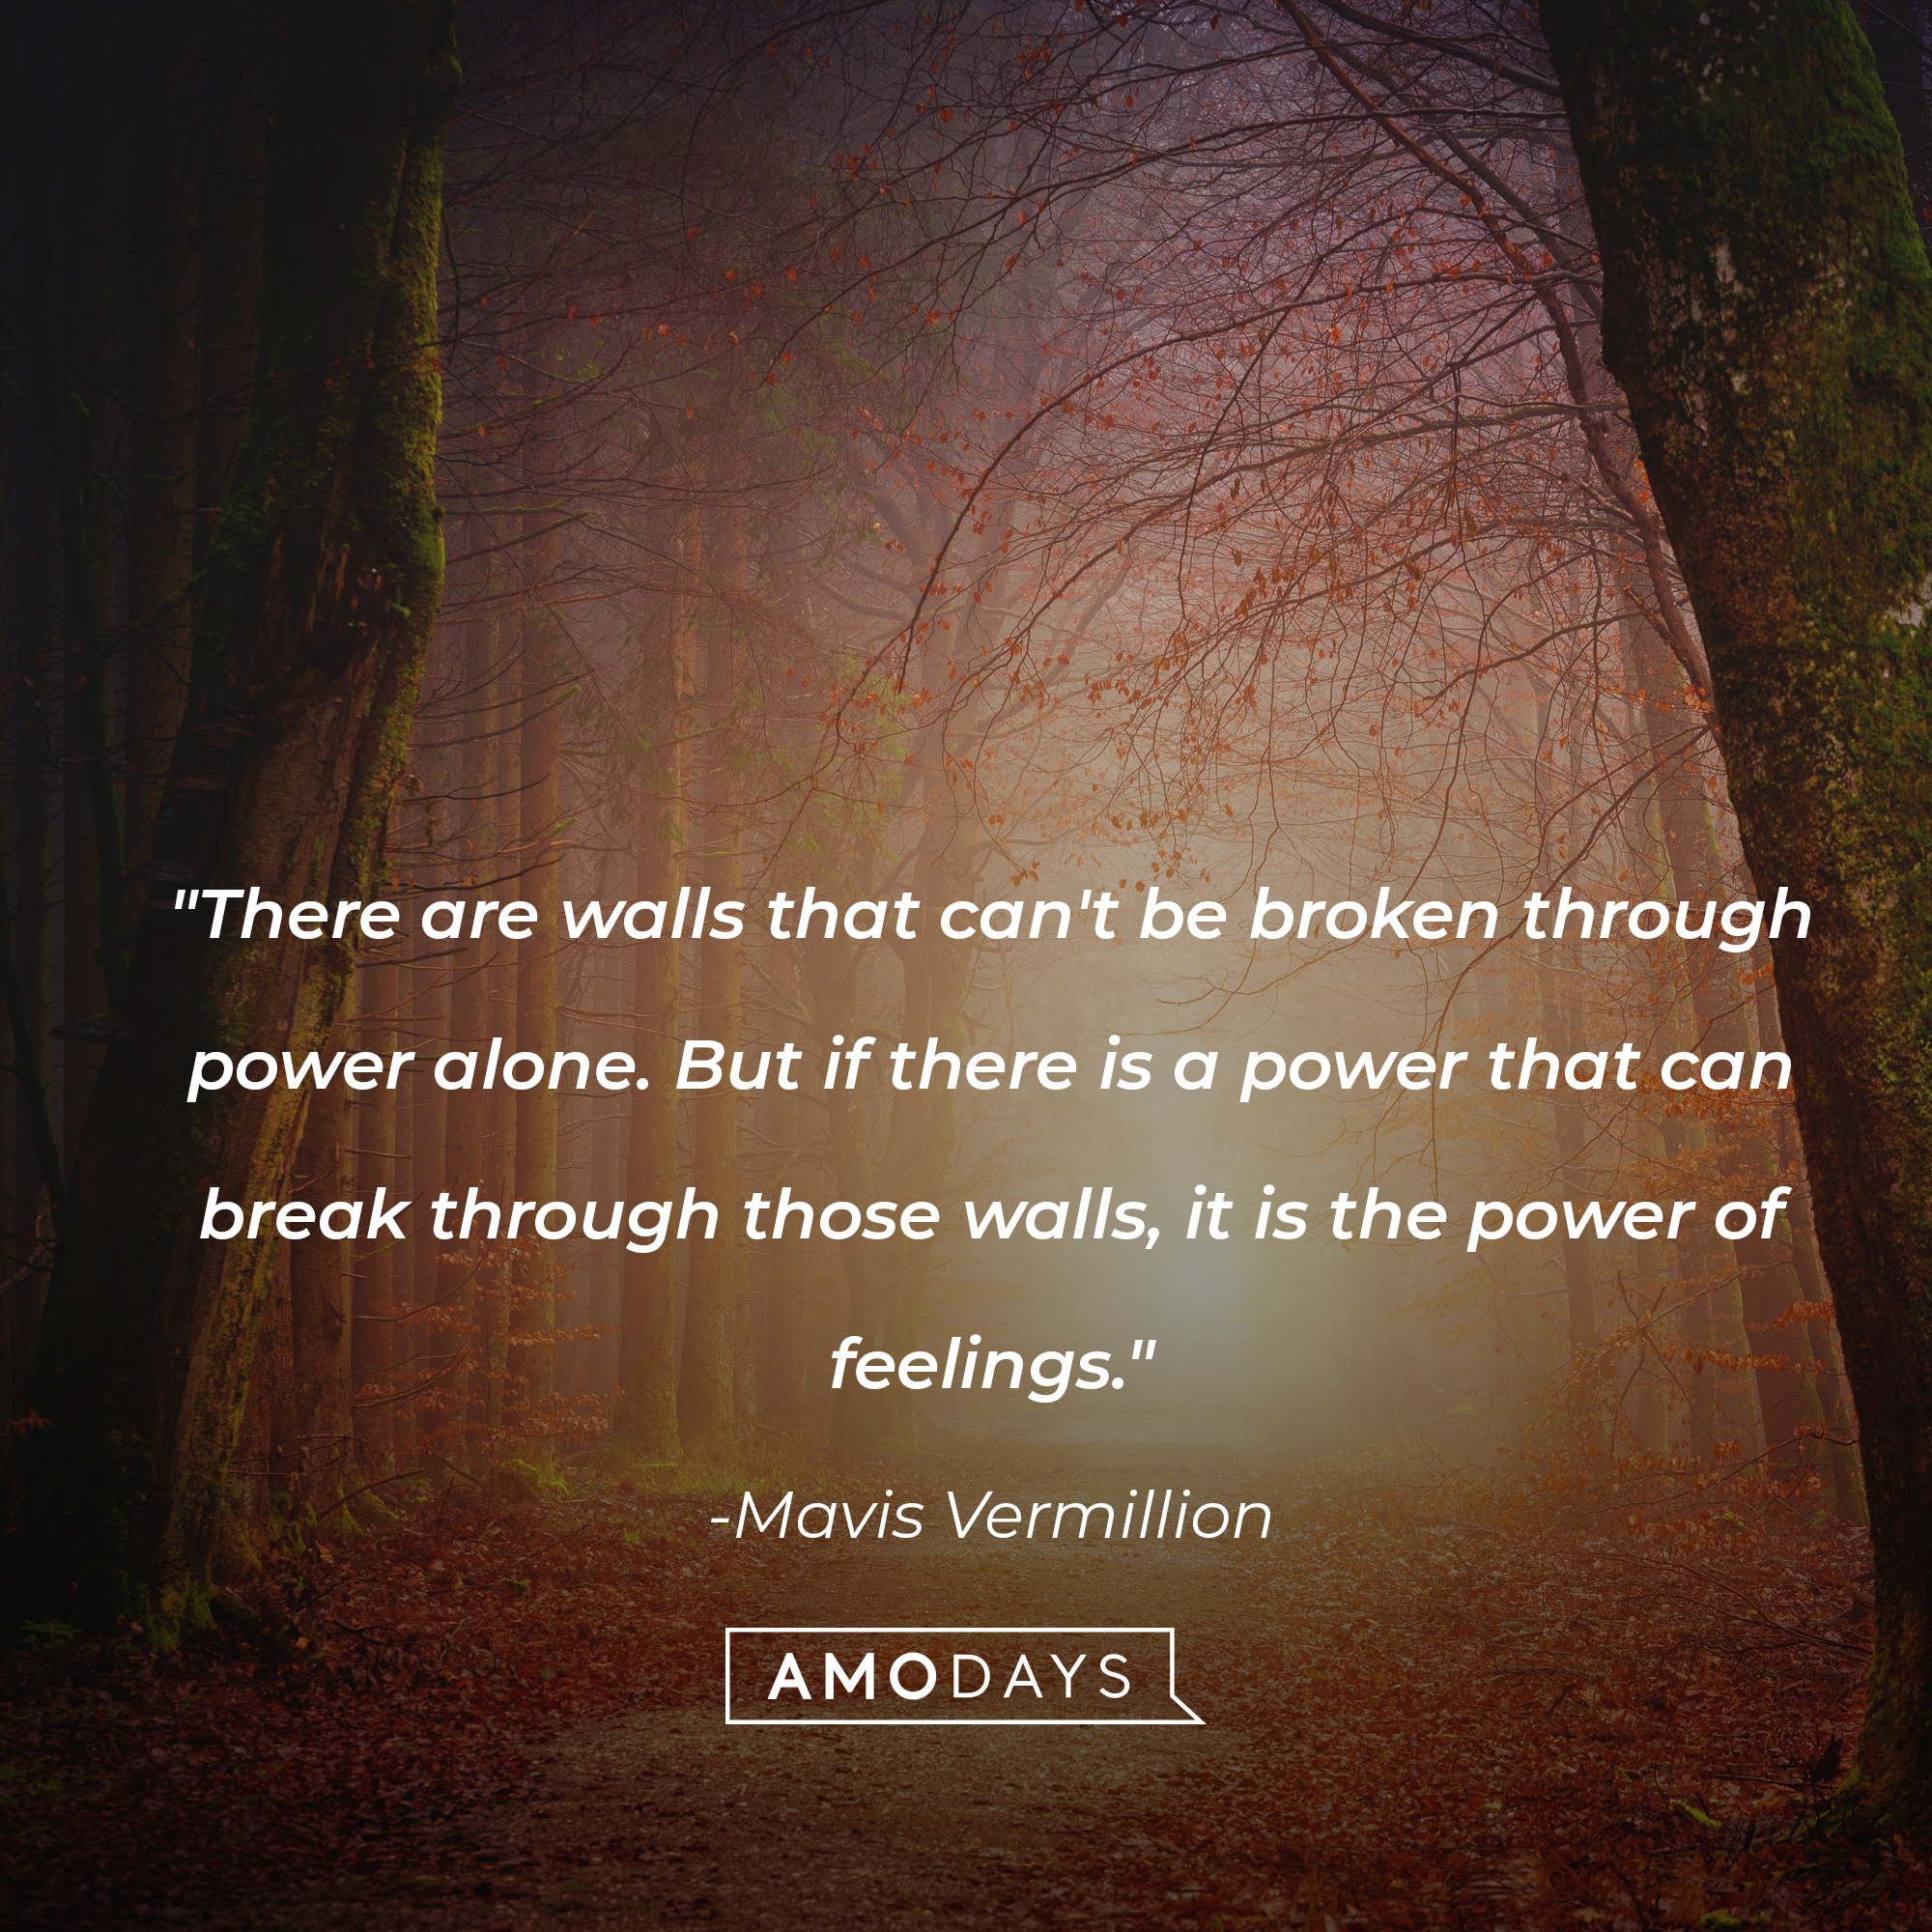 Mavis Vermillion's quote: "There are walls that can't be broken through power alone. But if there is a power that can break through those walls, it is the power of feelings." | Image: Unsplash